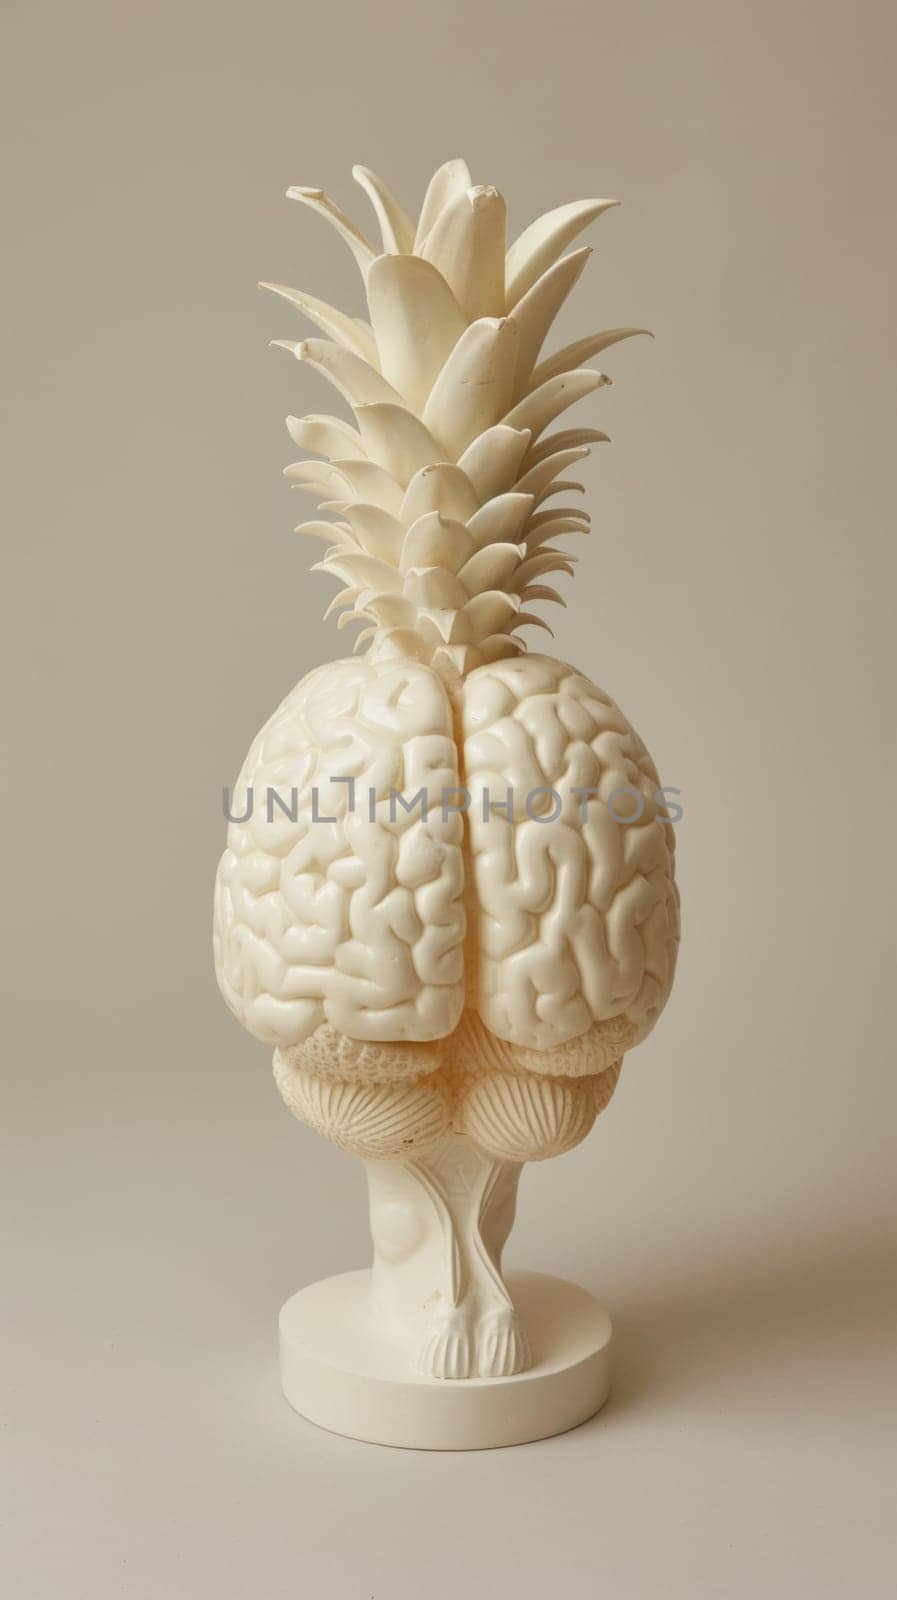 A pineapple shaped like a brain on top of a stand, AI by starush